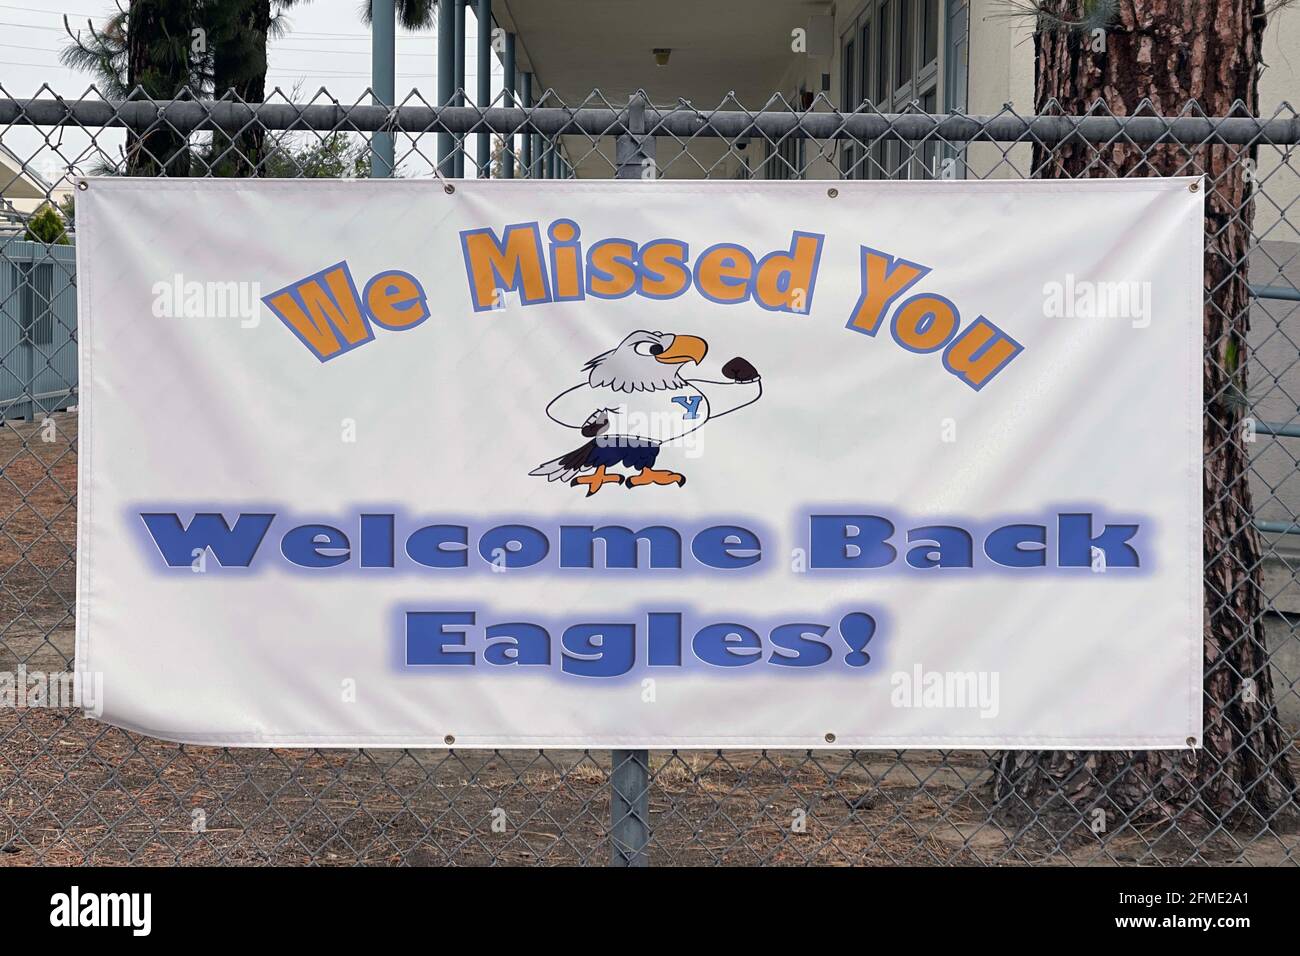 A Welcome Back sign at Ynez Elementary School, Saturday, May 8, 2021, in Monterey Park, Calif. Stock Photo